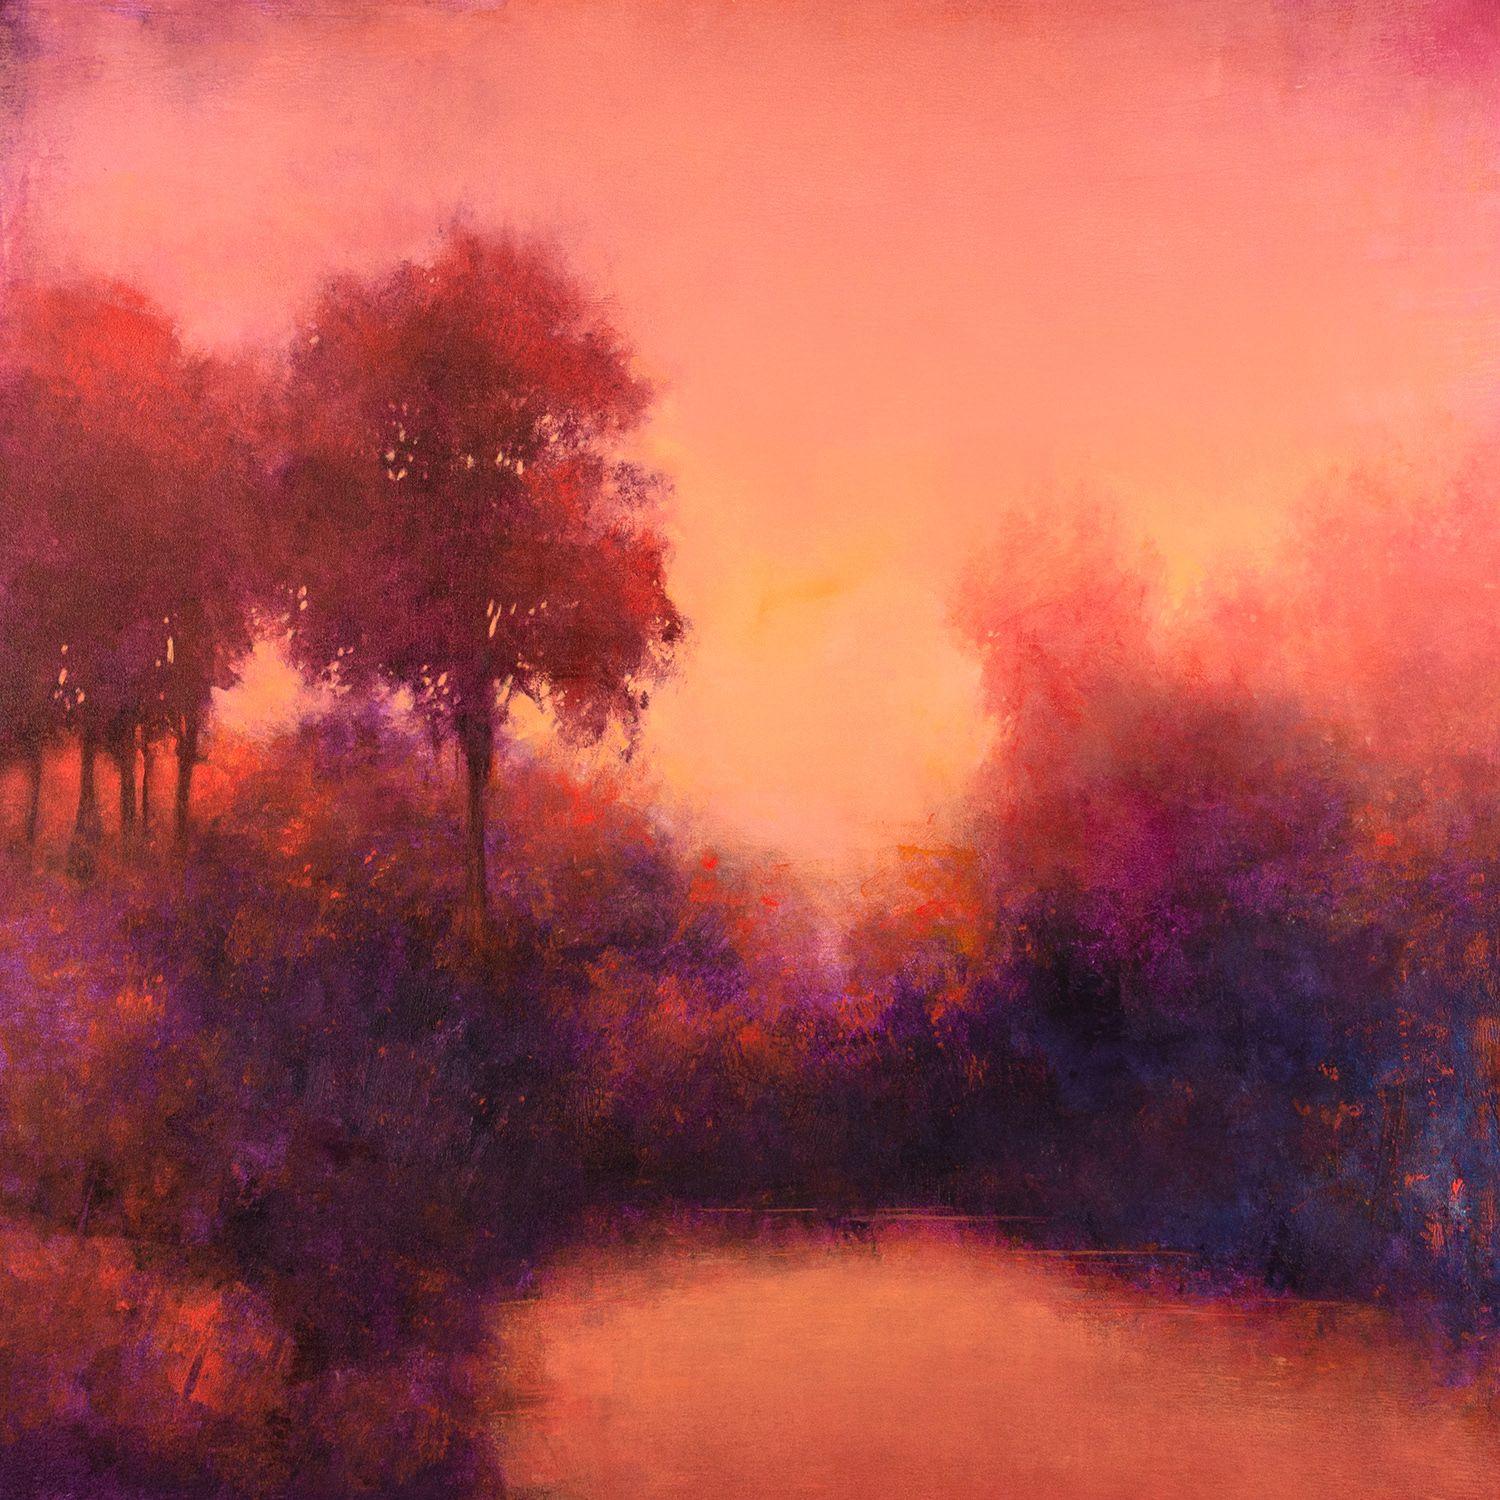 Pink Sunset 221009 Modern jewel tones landscape painting. 24x36 inches. Pink Sunset 221009 is a modern impressionist landscape painting created with palette knives and non traditional tools. This painting has nice rich jewel tones and glowing light.